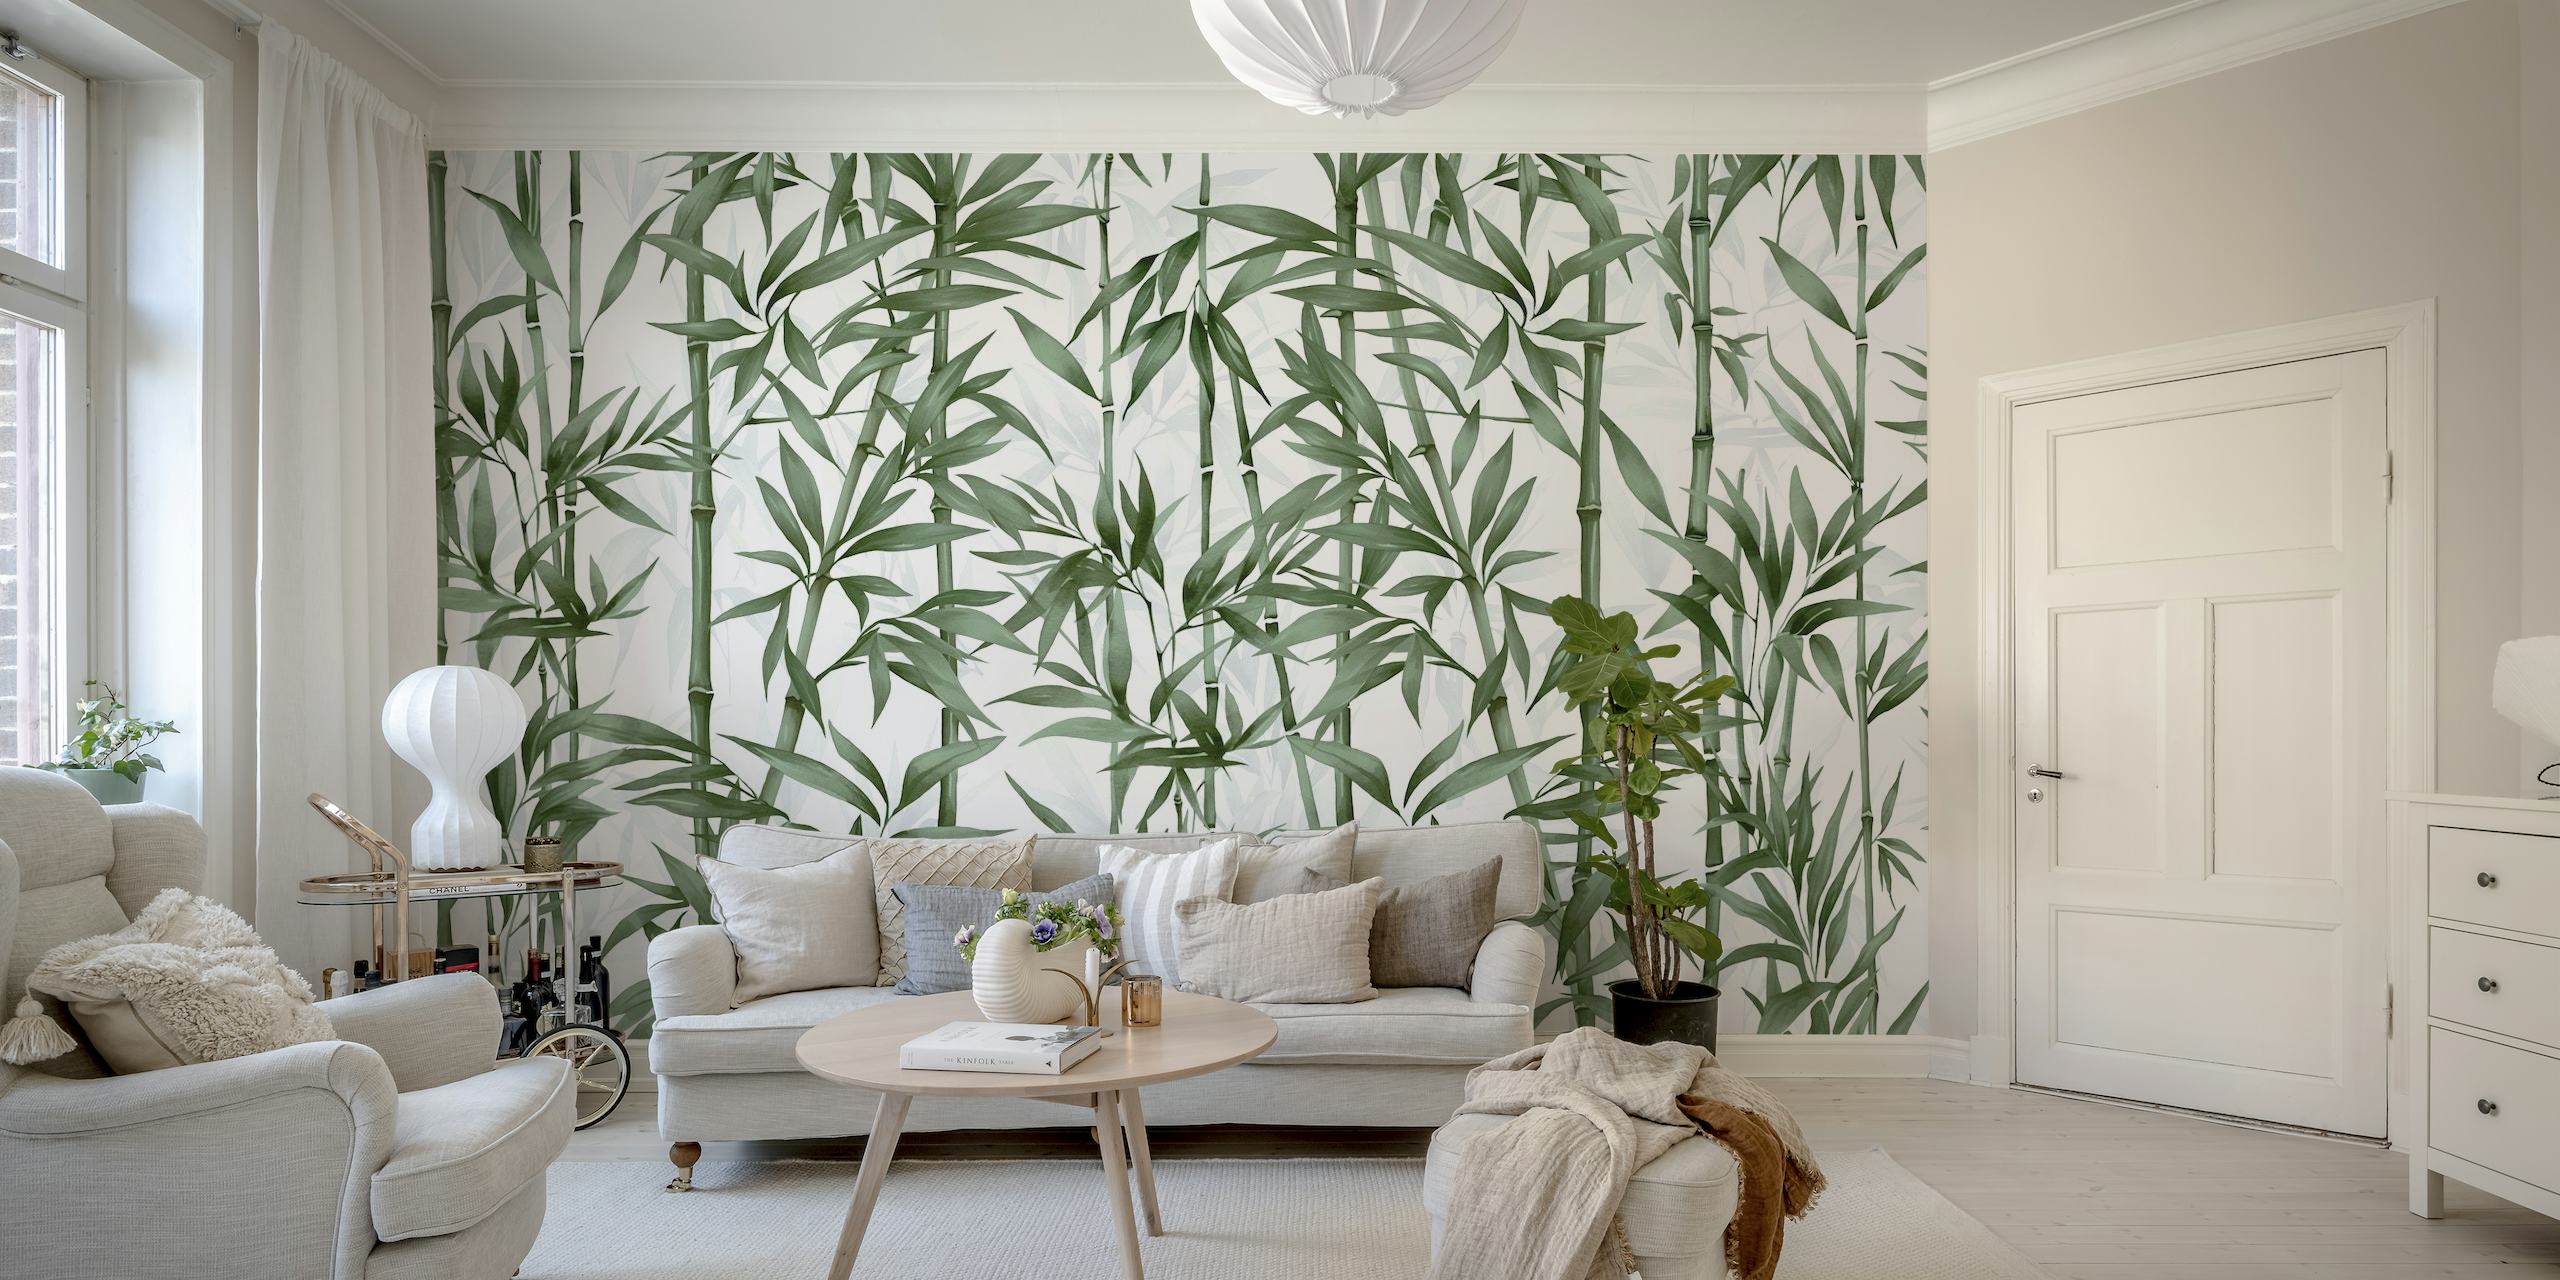 Green bamboo stalks wall mural for tranquil interior decor